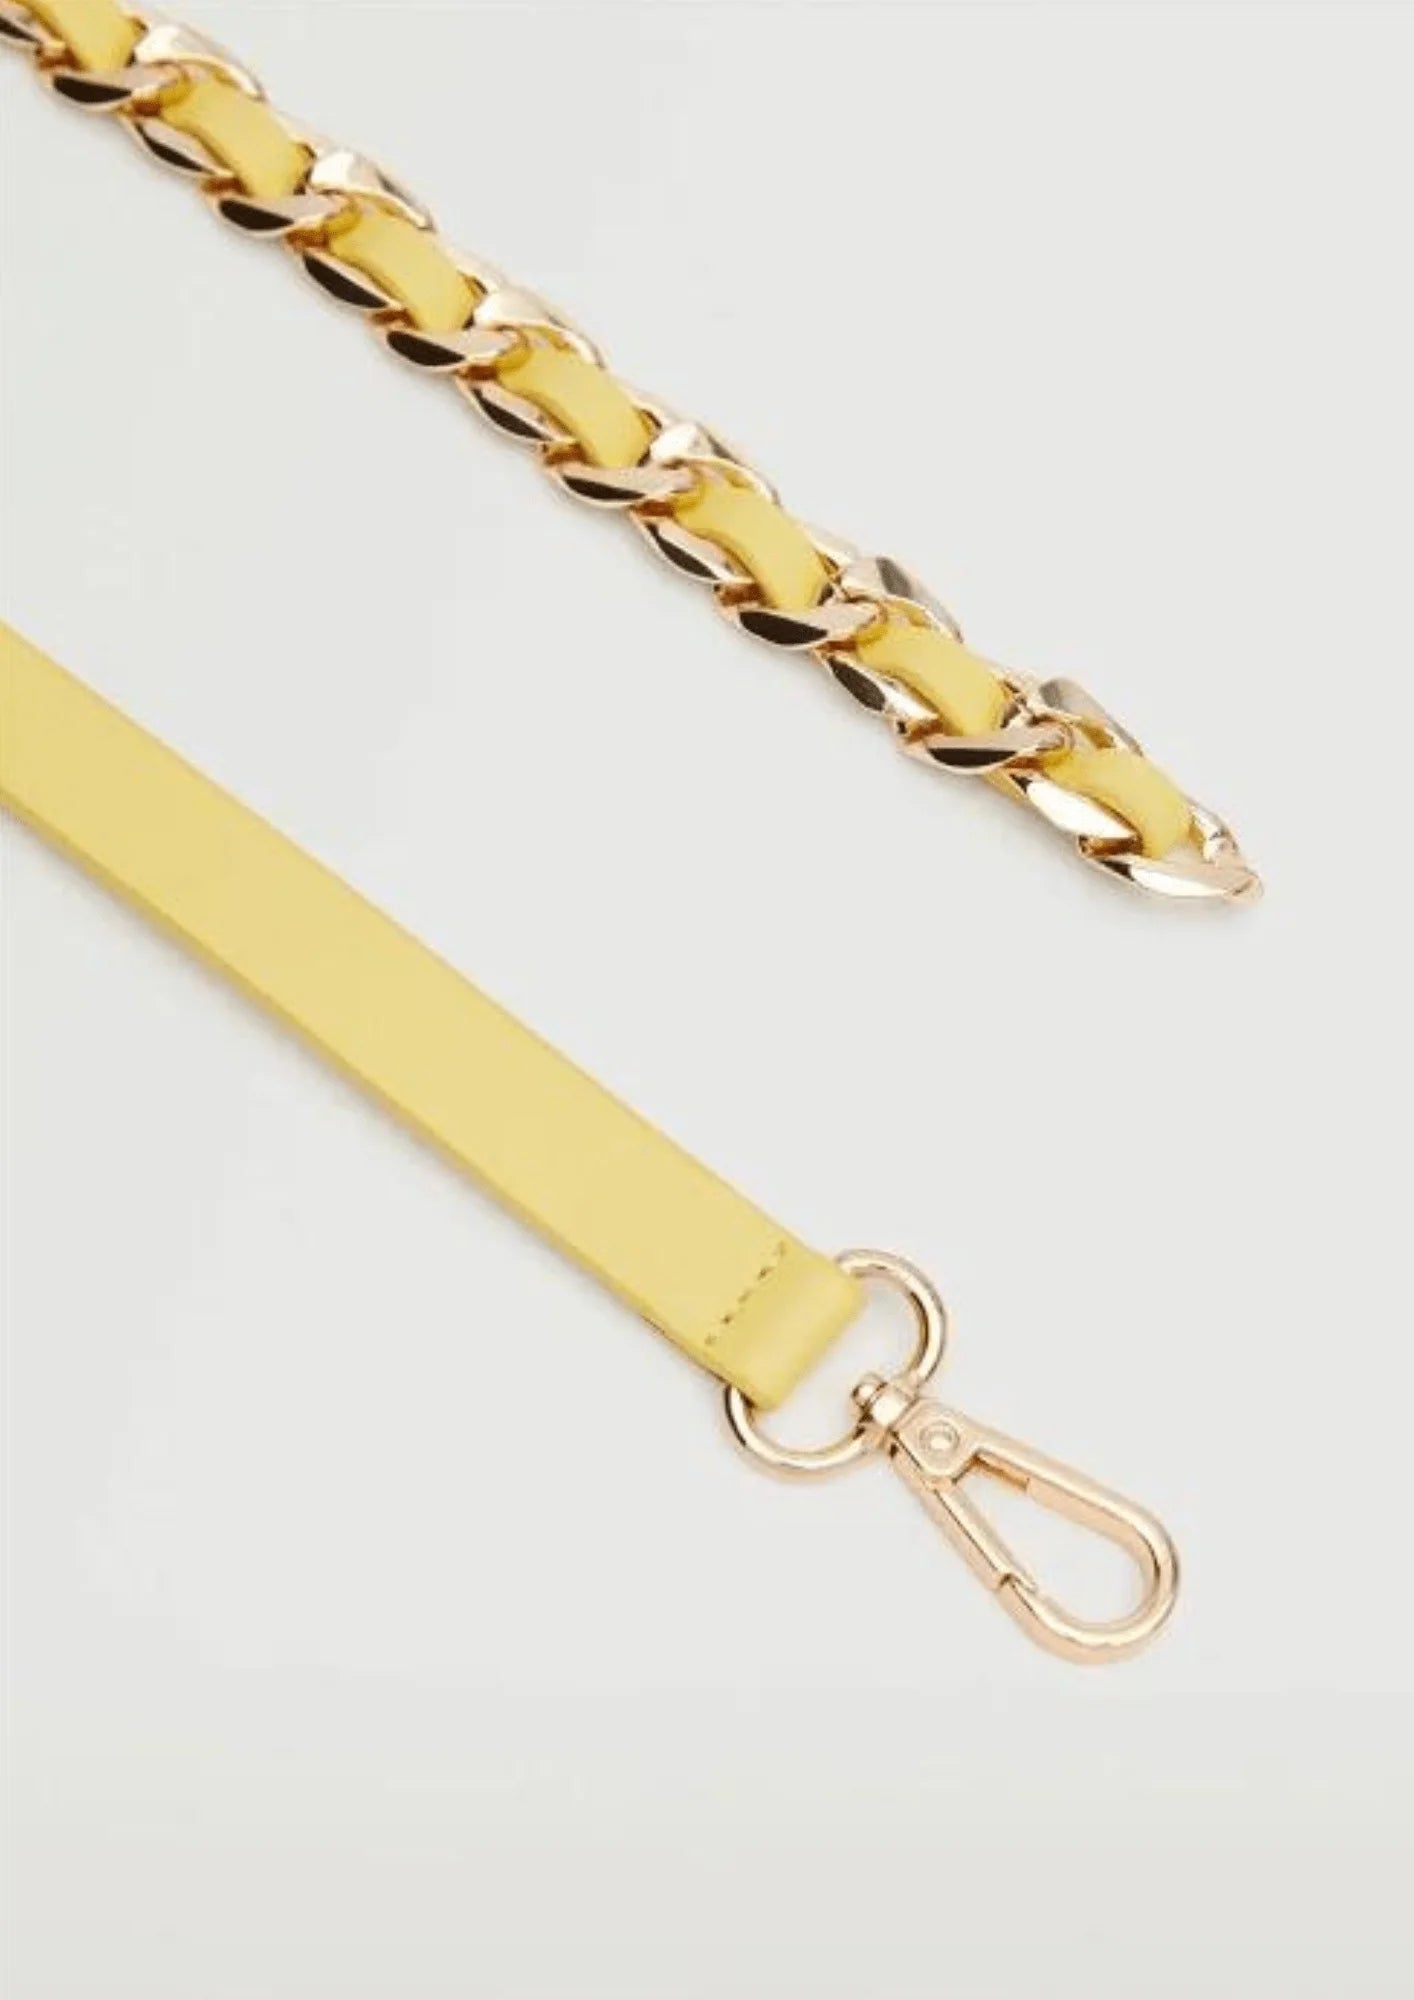 YELLOW BELT WITH CHAIN